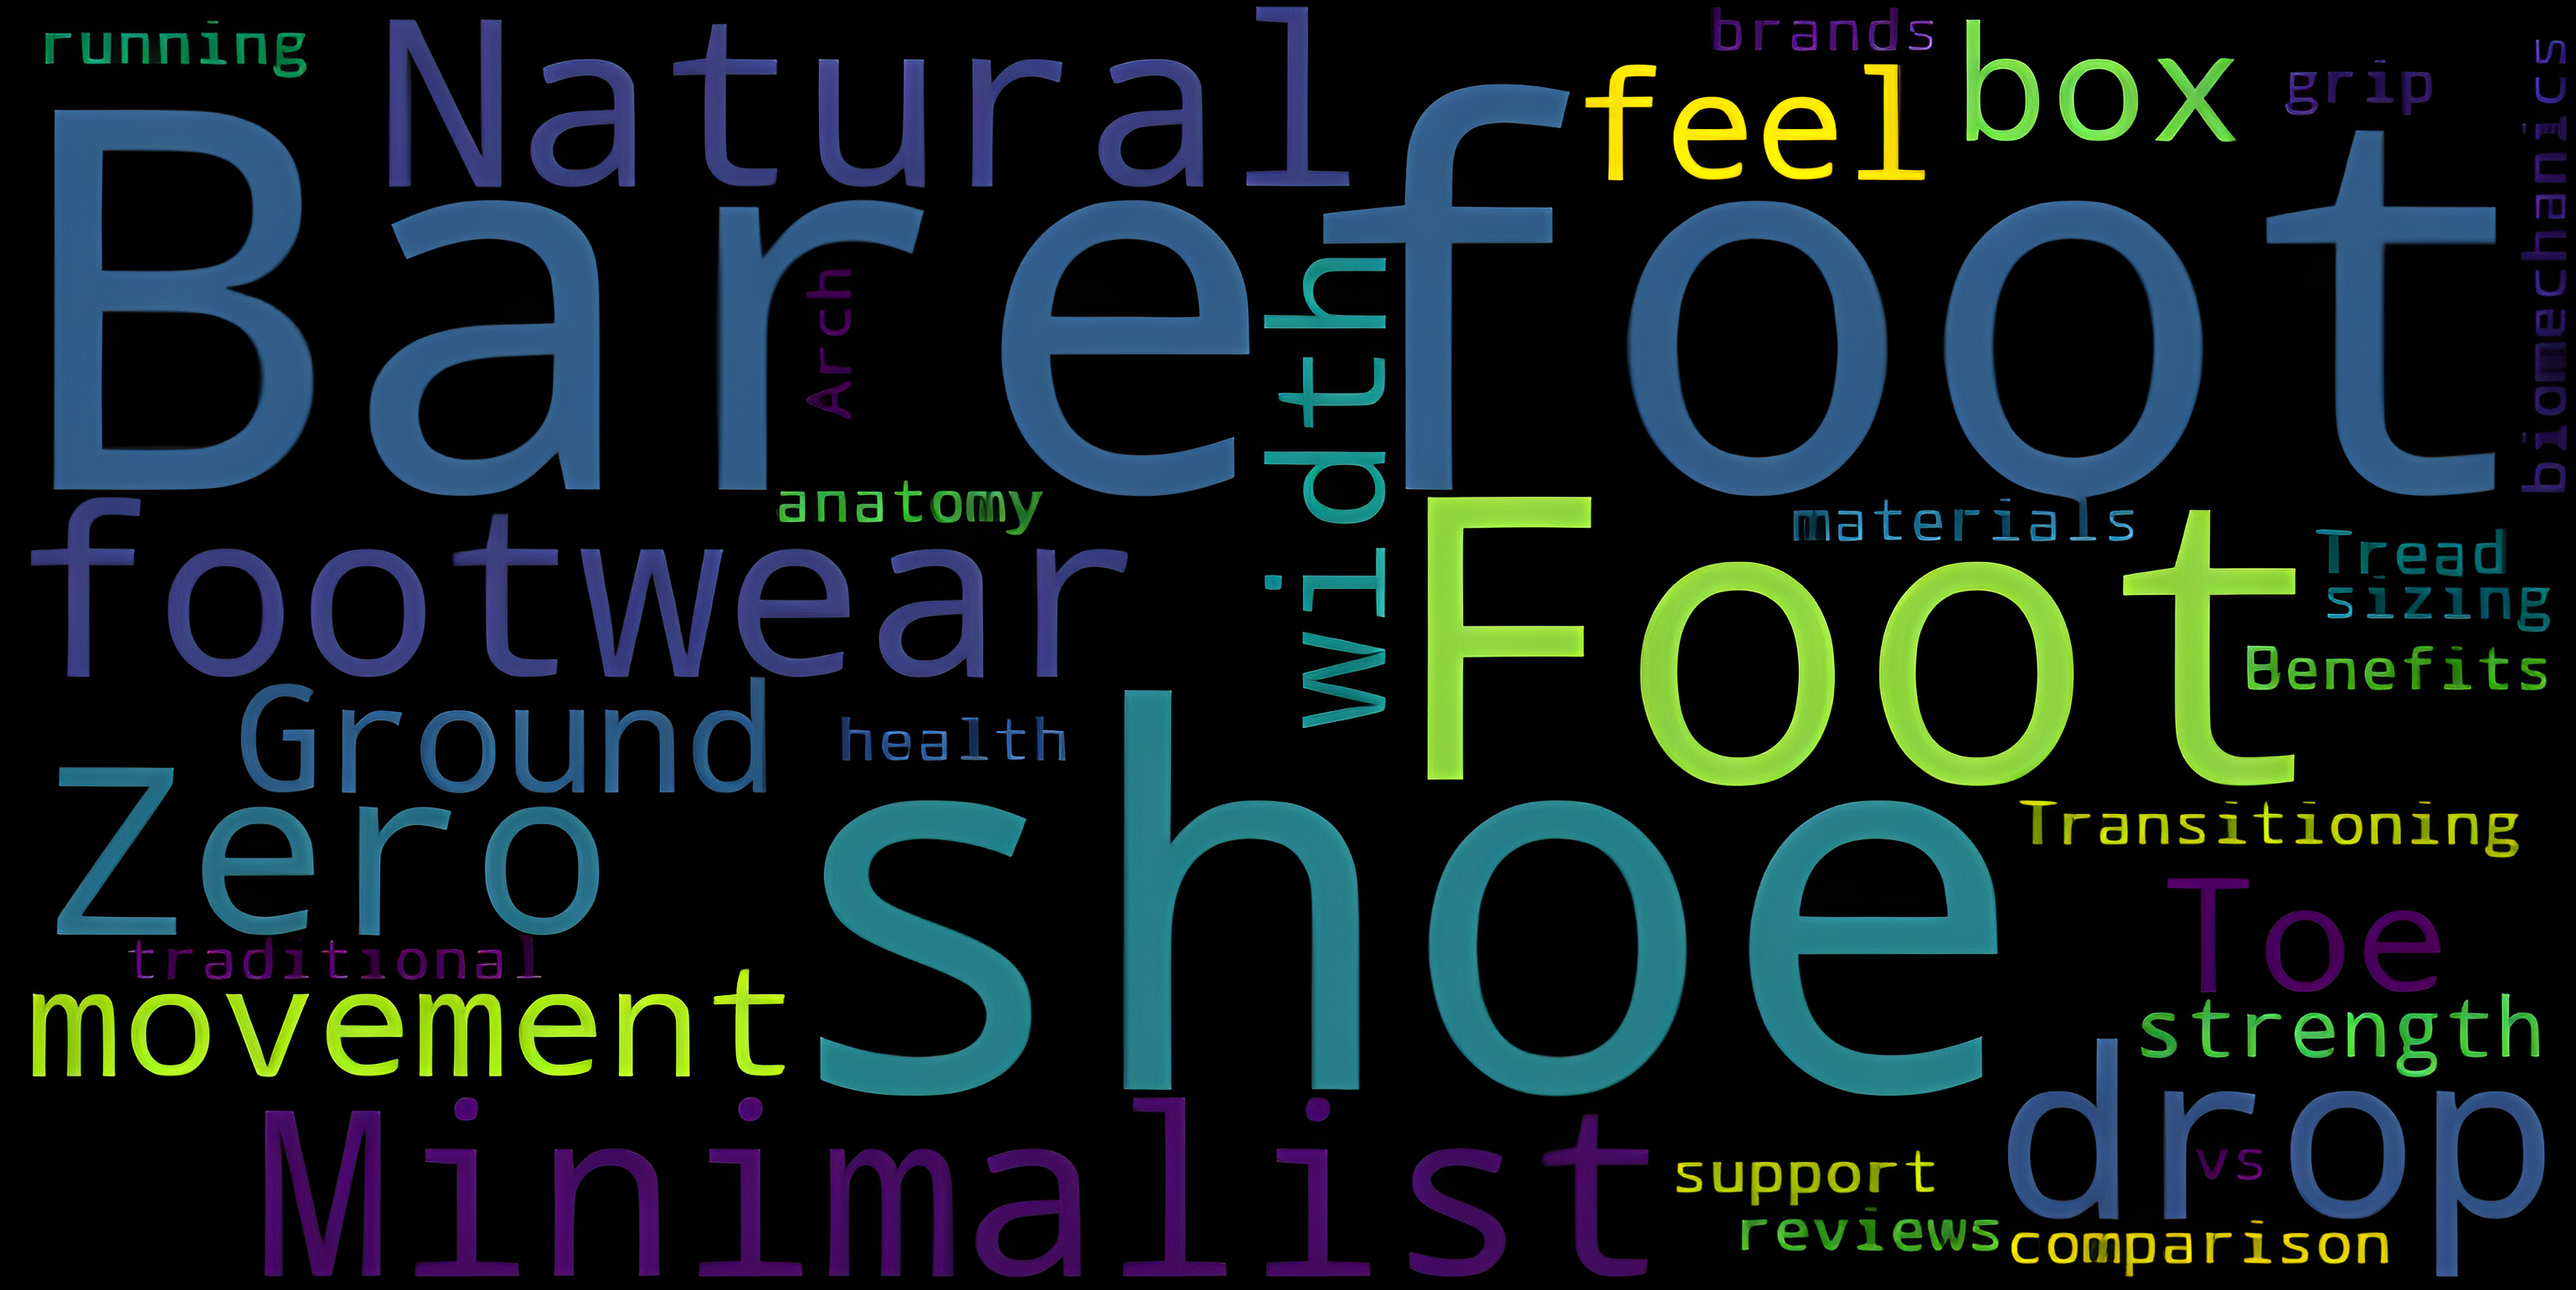 Choosing the Best barefoot shoes for Healthy Feet